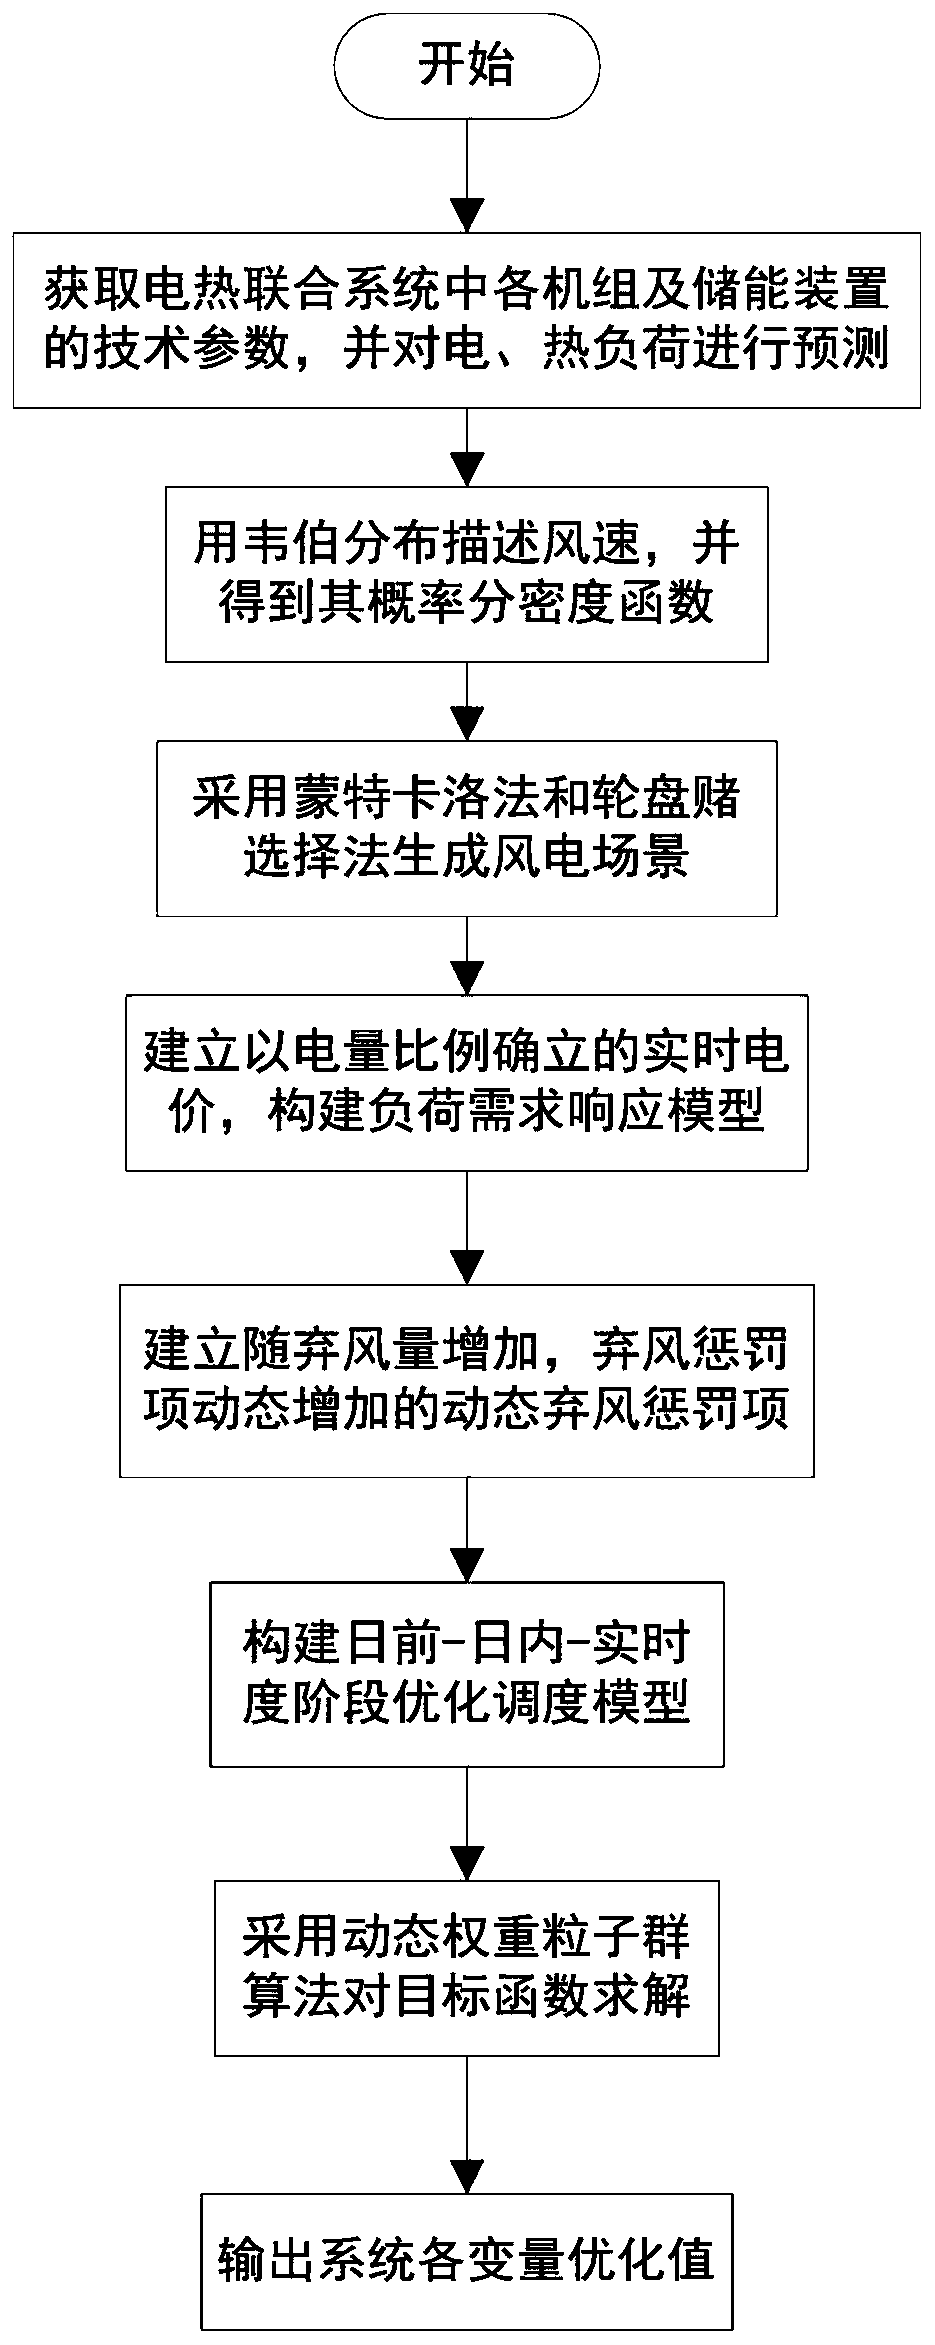 Multi-stage scene generation electric heating system optimal scheduling method based on wind power consumption